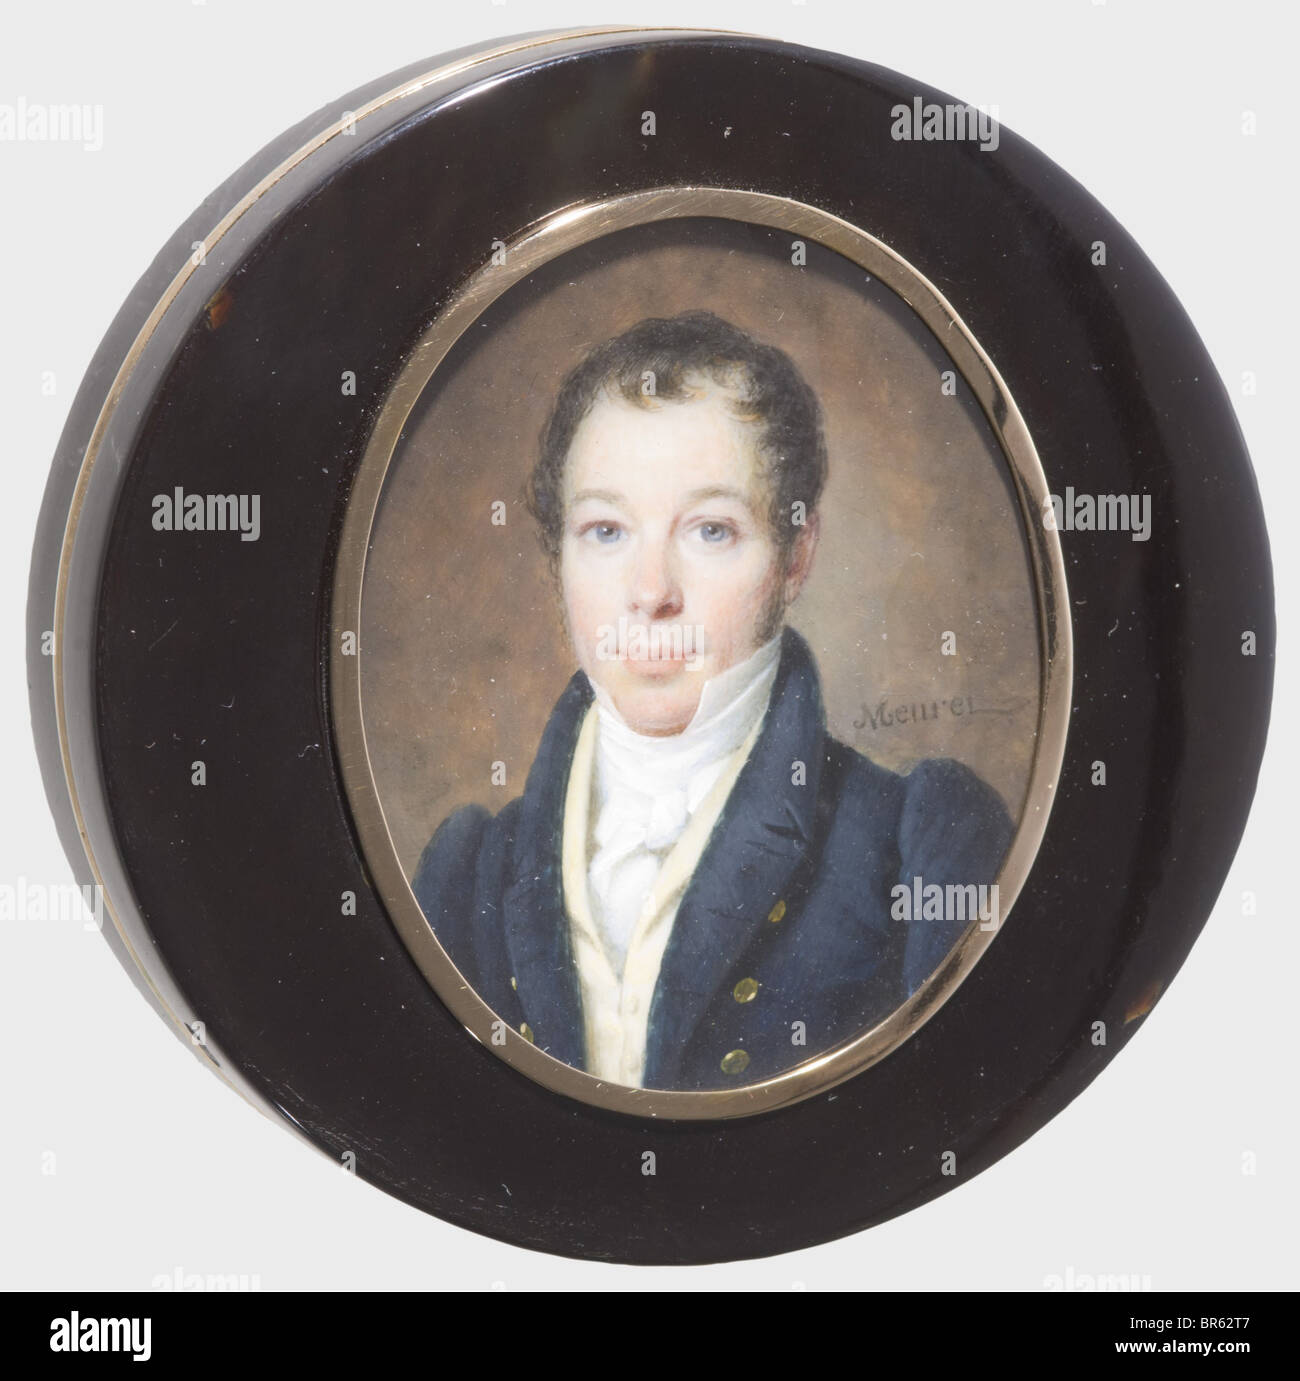 Francois Meuret (1800 - 1887) and Pierre Andre Montauban - a gold-lined tortoise shell box with a gentleman's portrait on ivory., Round shape, the inside lined with gold and stamped with the master's mark of Montauban as well as additional unclear hallmarks. On the lid a finely painted portrait of a gentleman in plainclothes, on the right border signed 'Meuret'. Diameter 7.8 cm. Francois Meuret, French miniature painter, painter to the court of King Louis Philippe and the family d'Orleans, already exhibits 1822 in the Paris Salon. He wins 1827 and 184, Artist's Copyright has not to be cleared Stock Photo